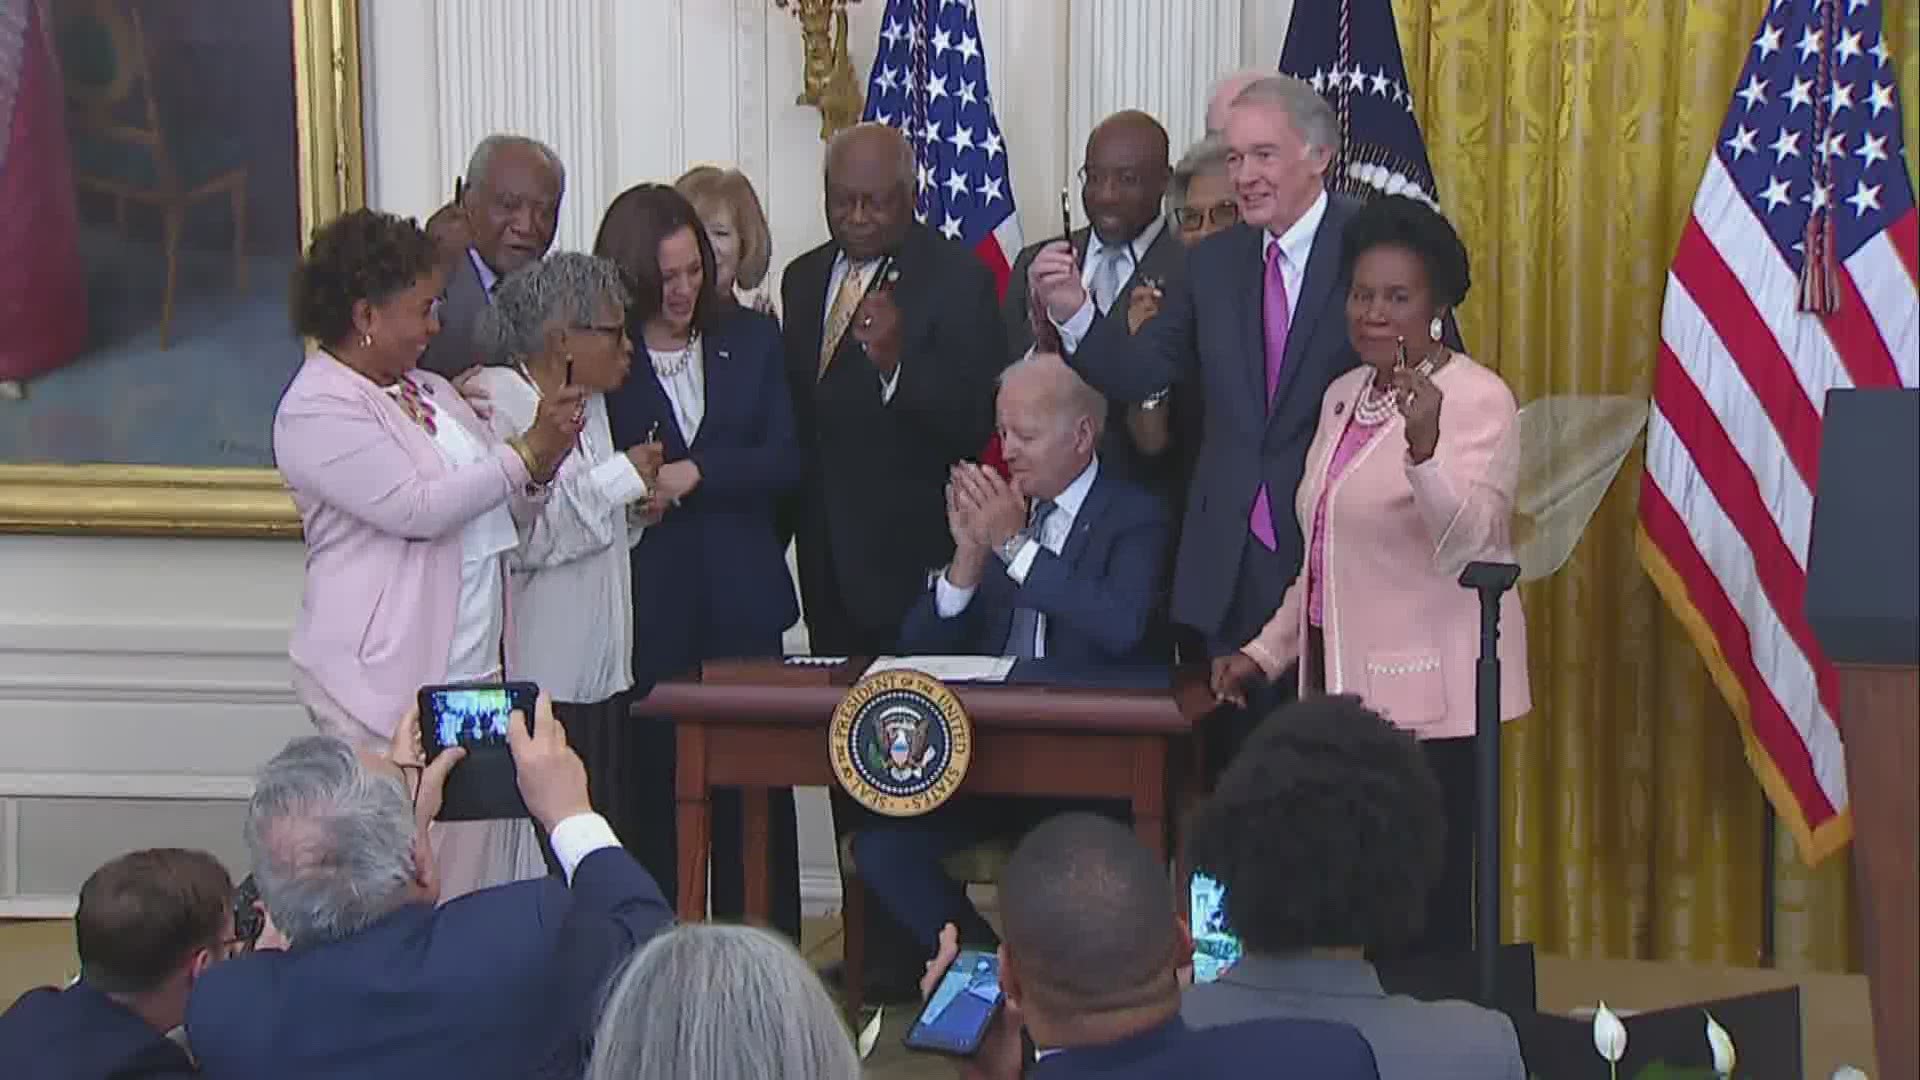 Texas "Grandmother of Juneteenth" Opal Lee was at President Biden's side when he signed the bill making June 19 a federal holiday. He gave her one of the pens used.